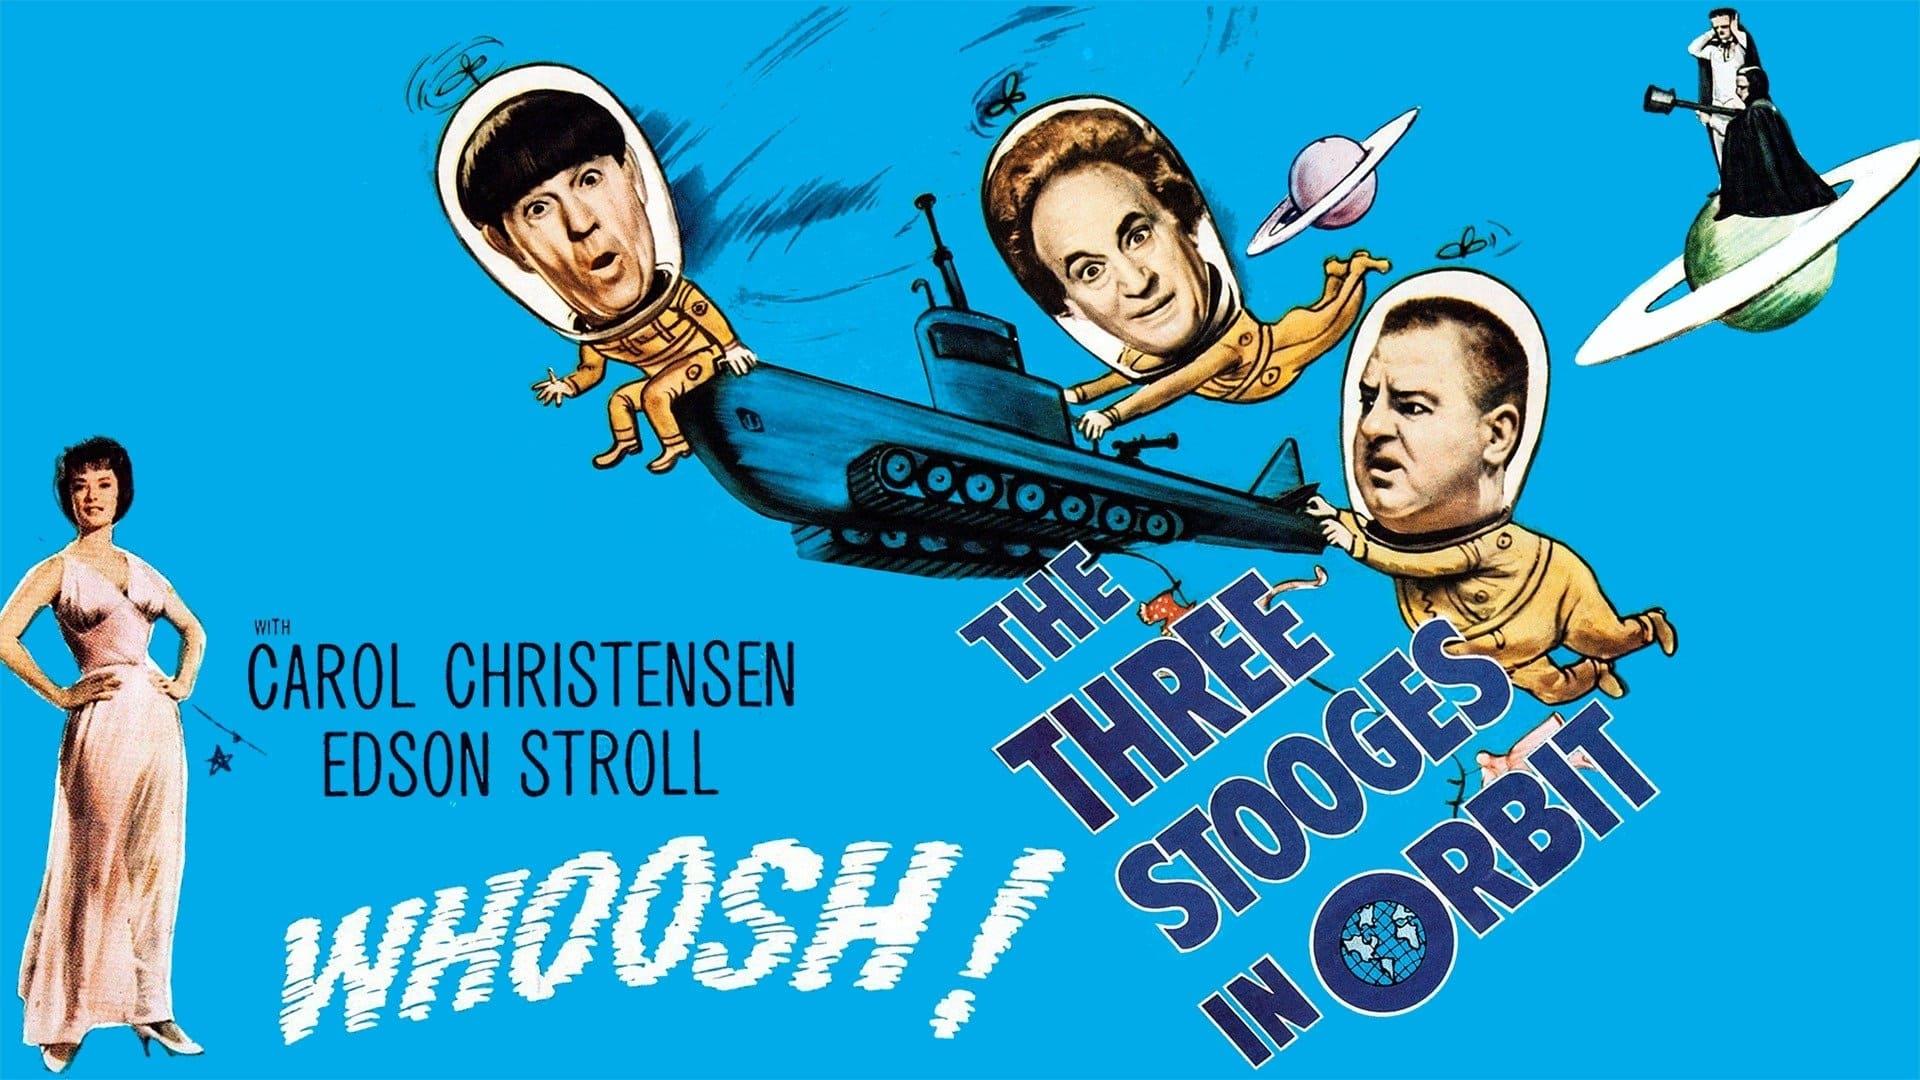 The Three Stooges in Orbit backdrop